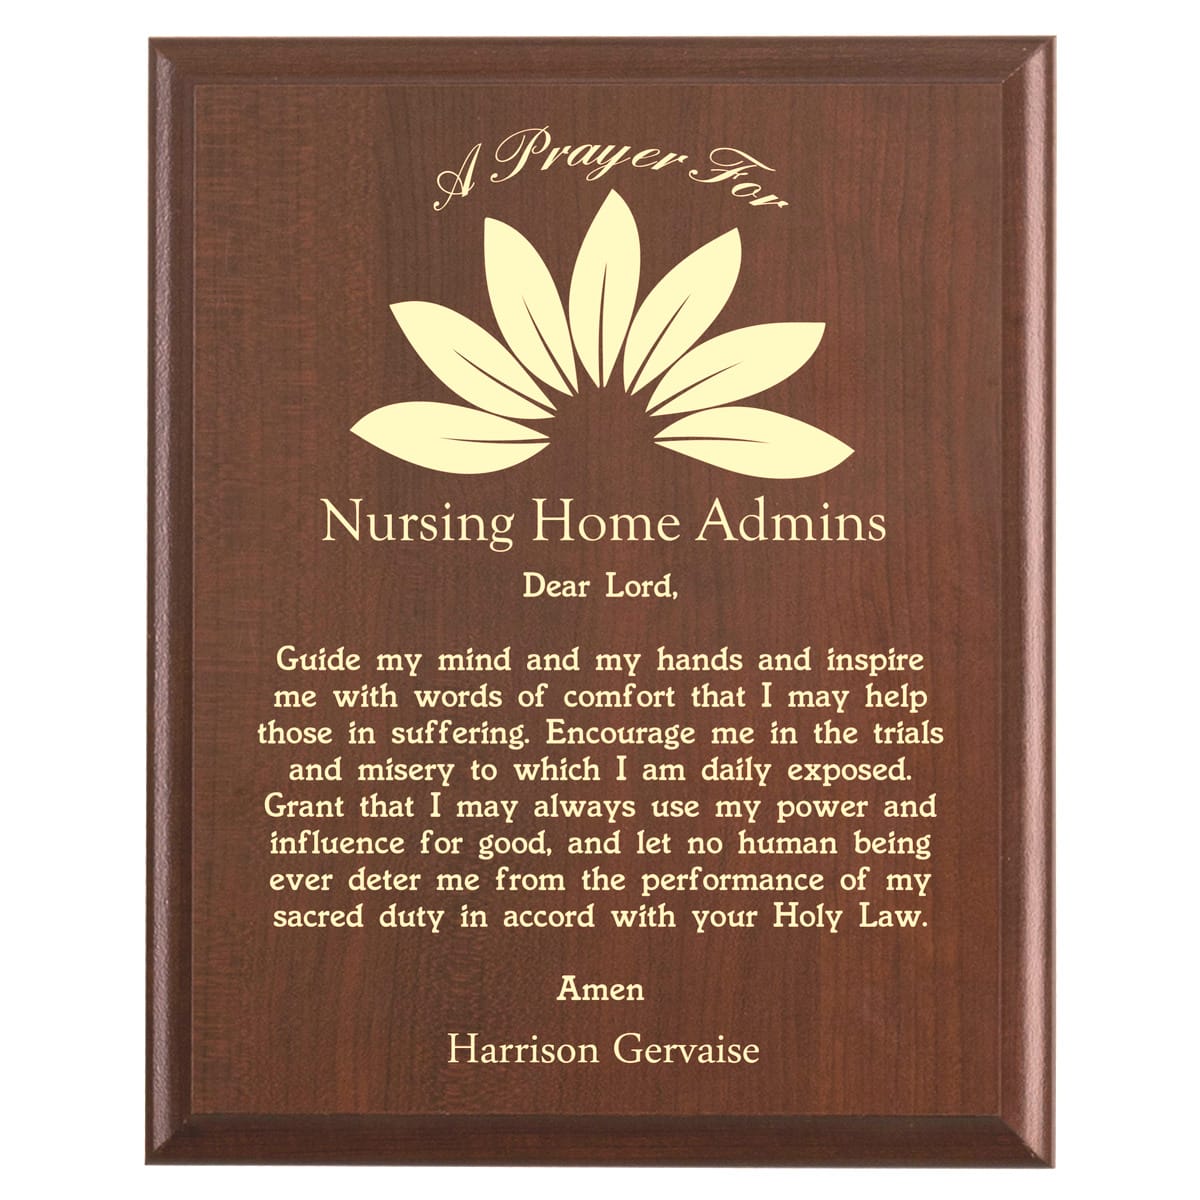 Plaque photo: Nursing Home Admin Prayer Plaque design with free personalization. Wood style finish with customized text.